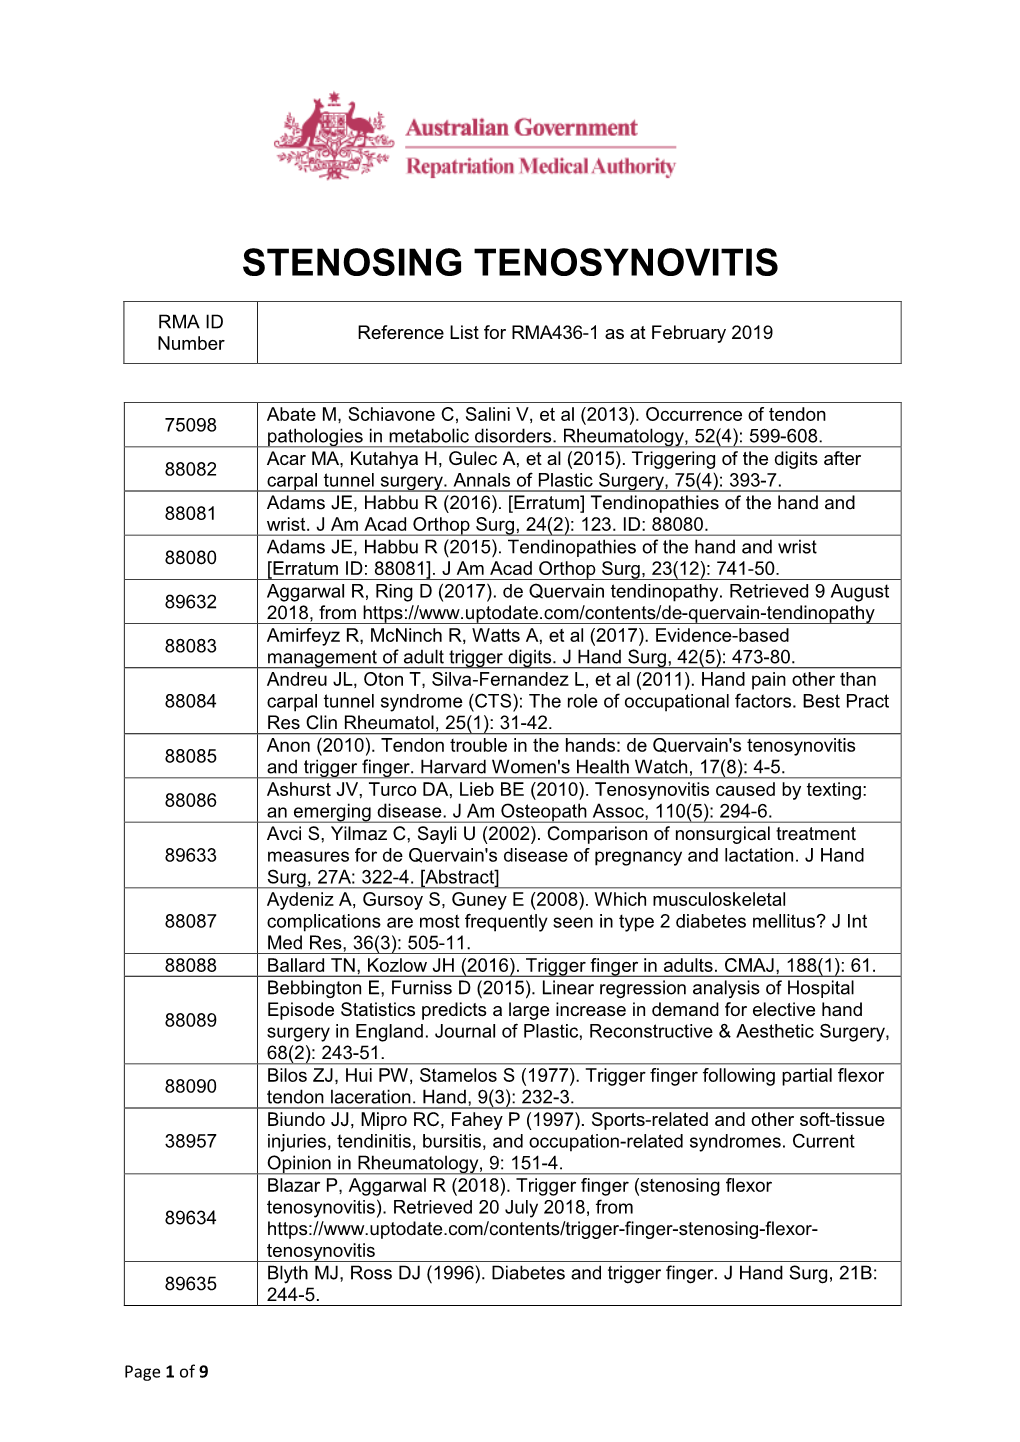 Reference List Concerning De Quervain Tenosynovitis